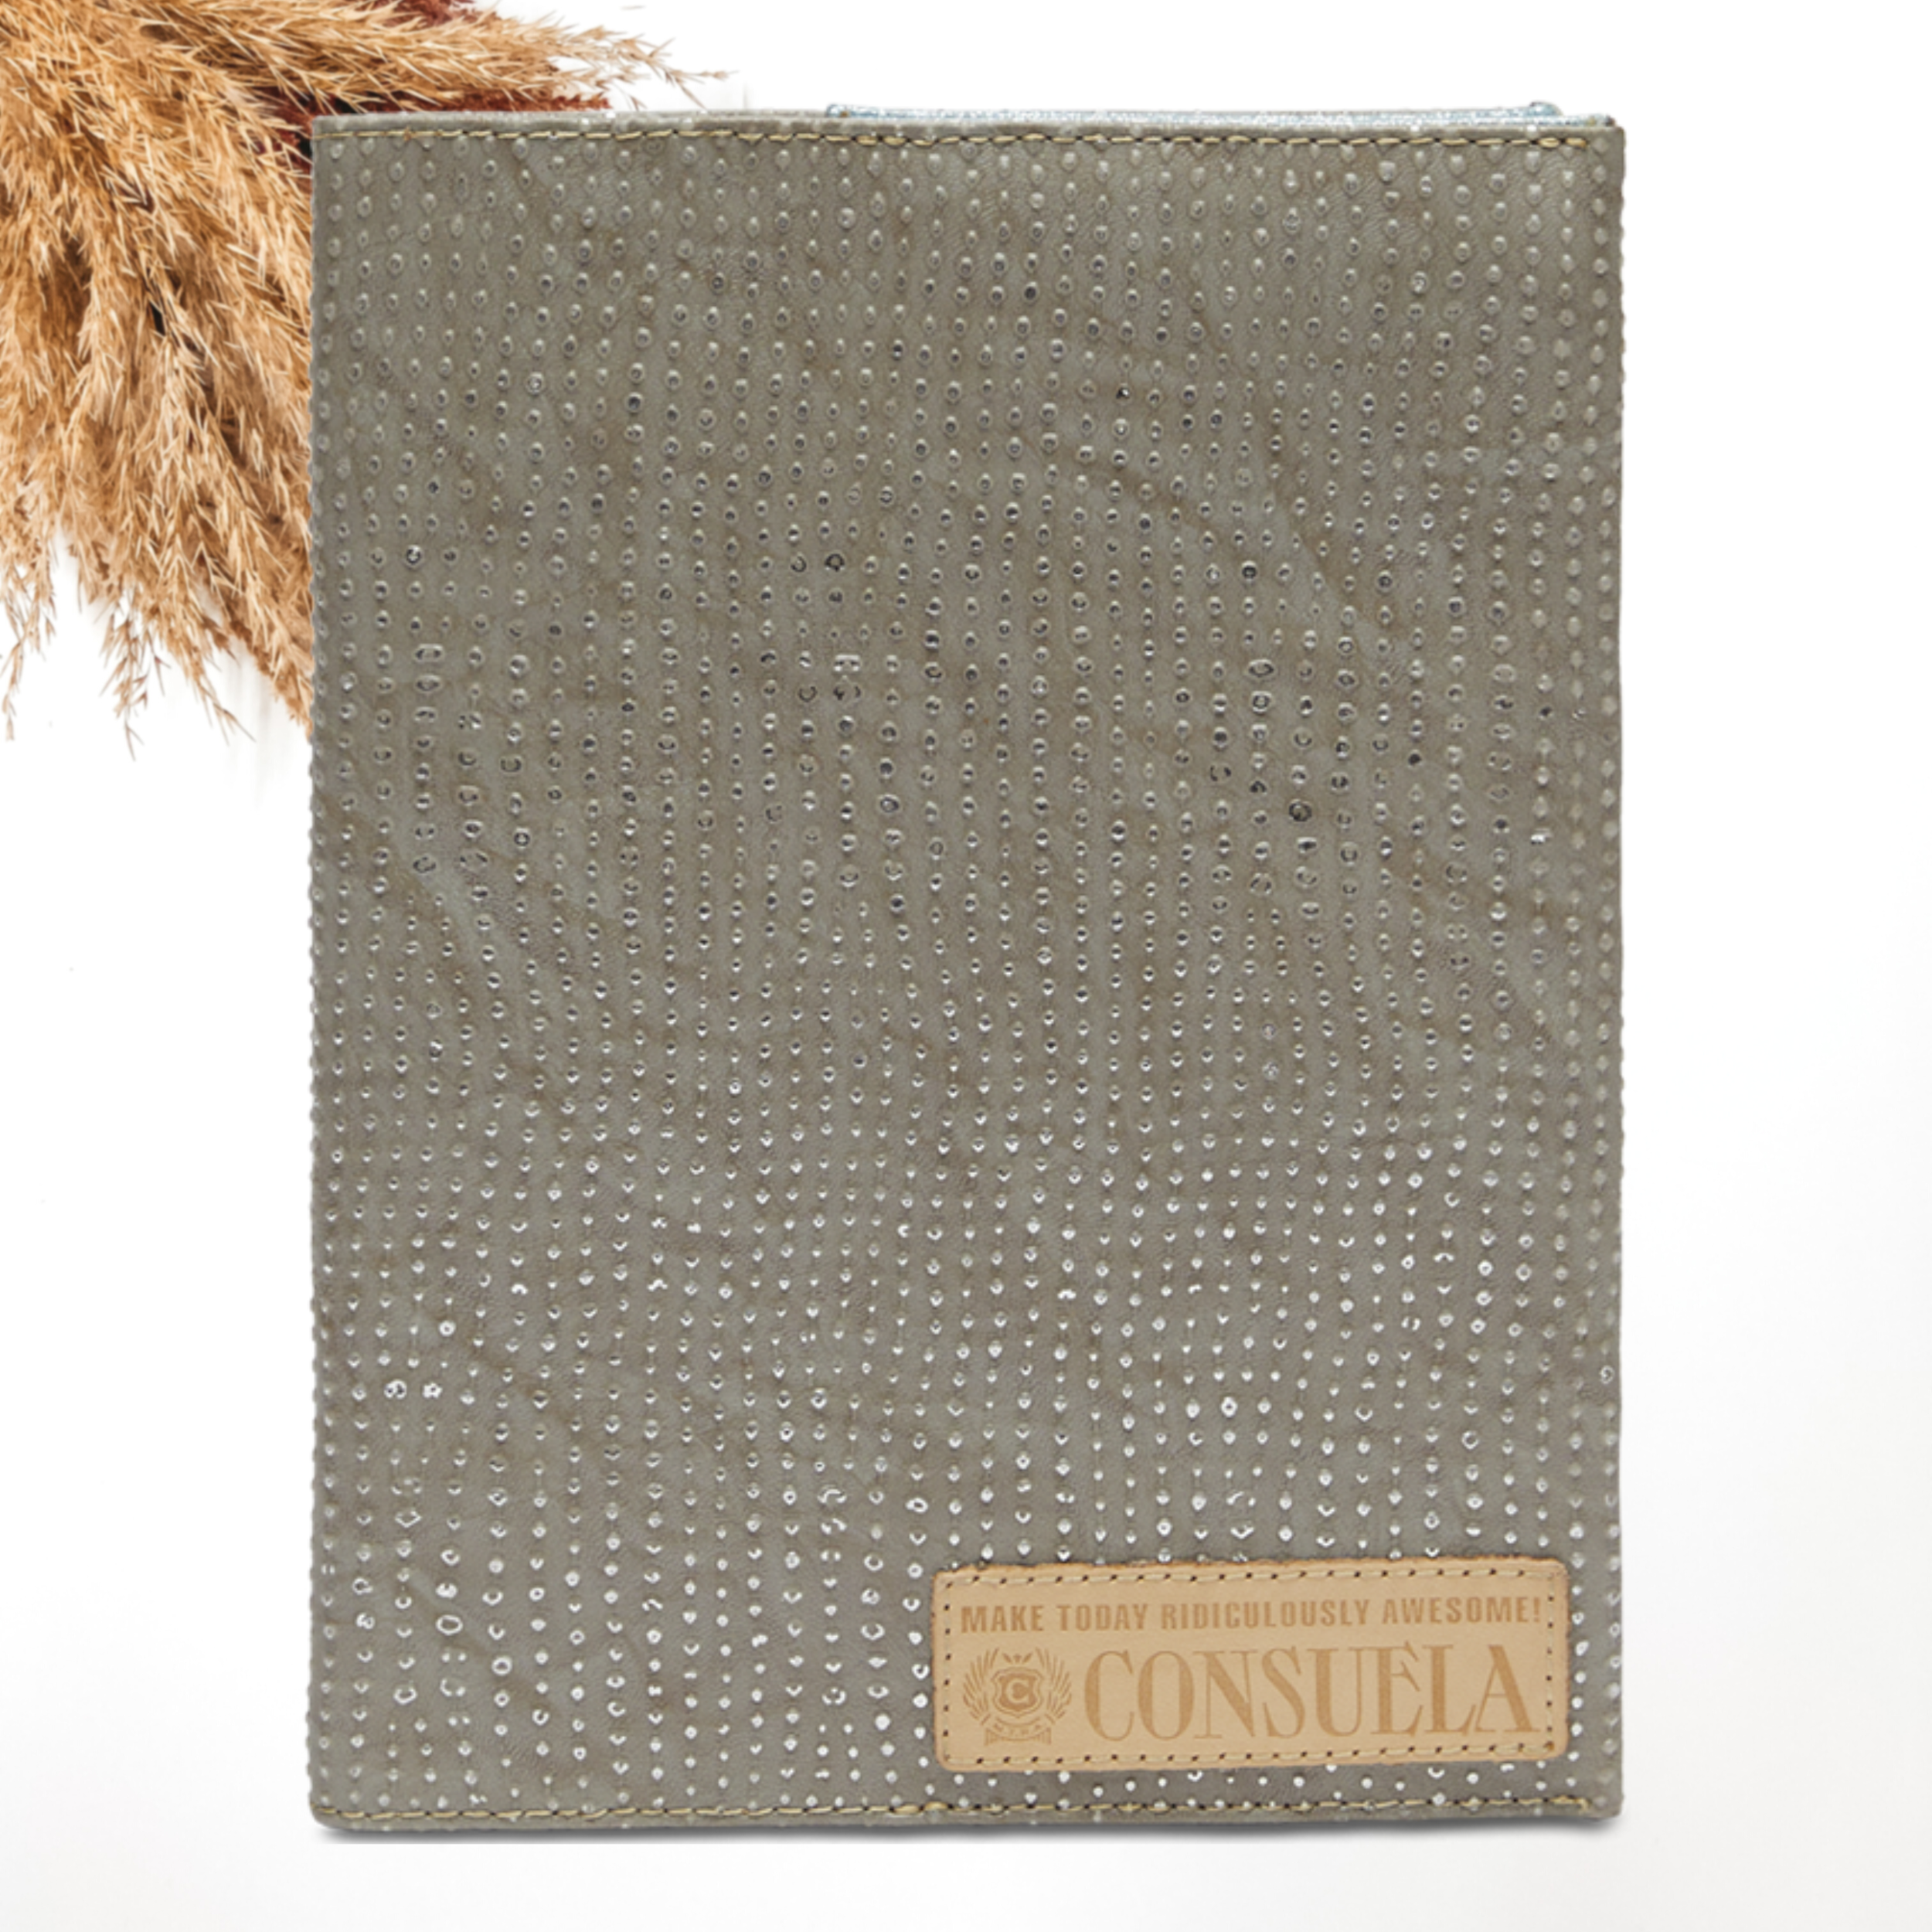 Pictured on a white background is a grey notebook cover with a dotted print. This notebook includes a light tan leather patch on the bottom right corner.